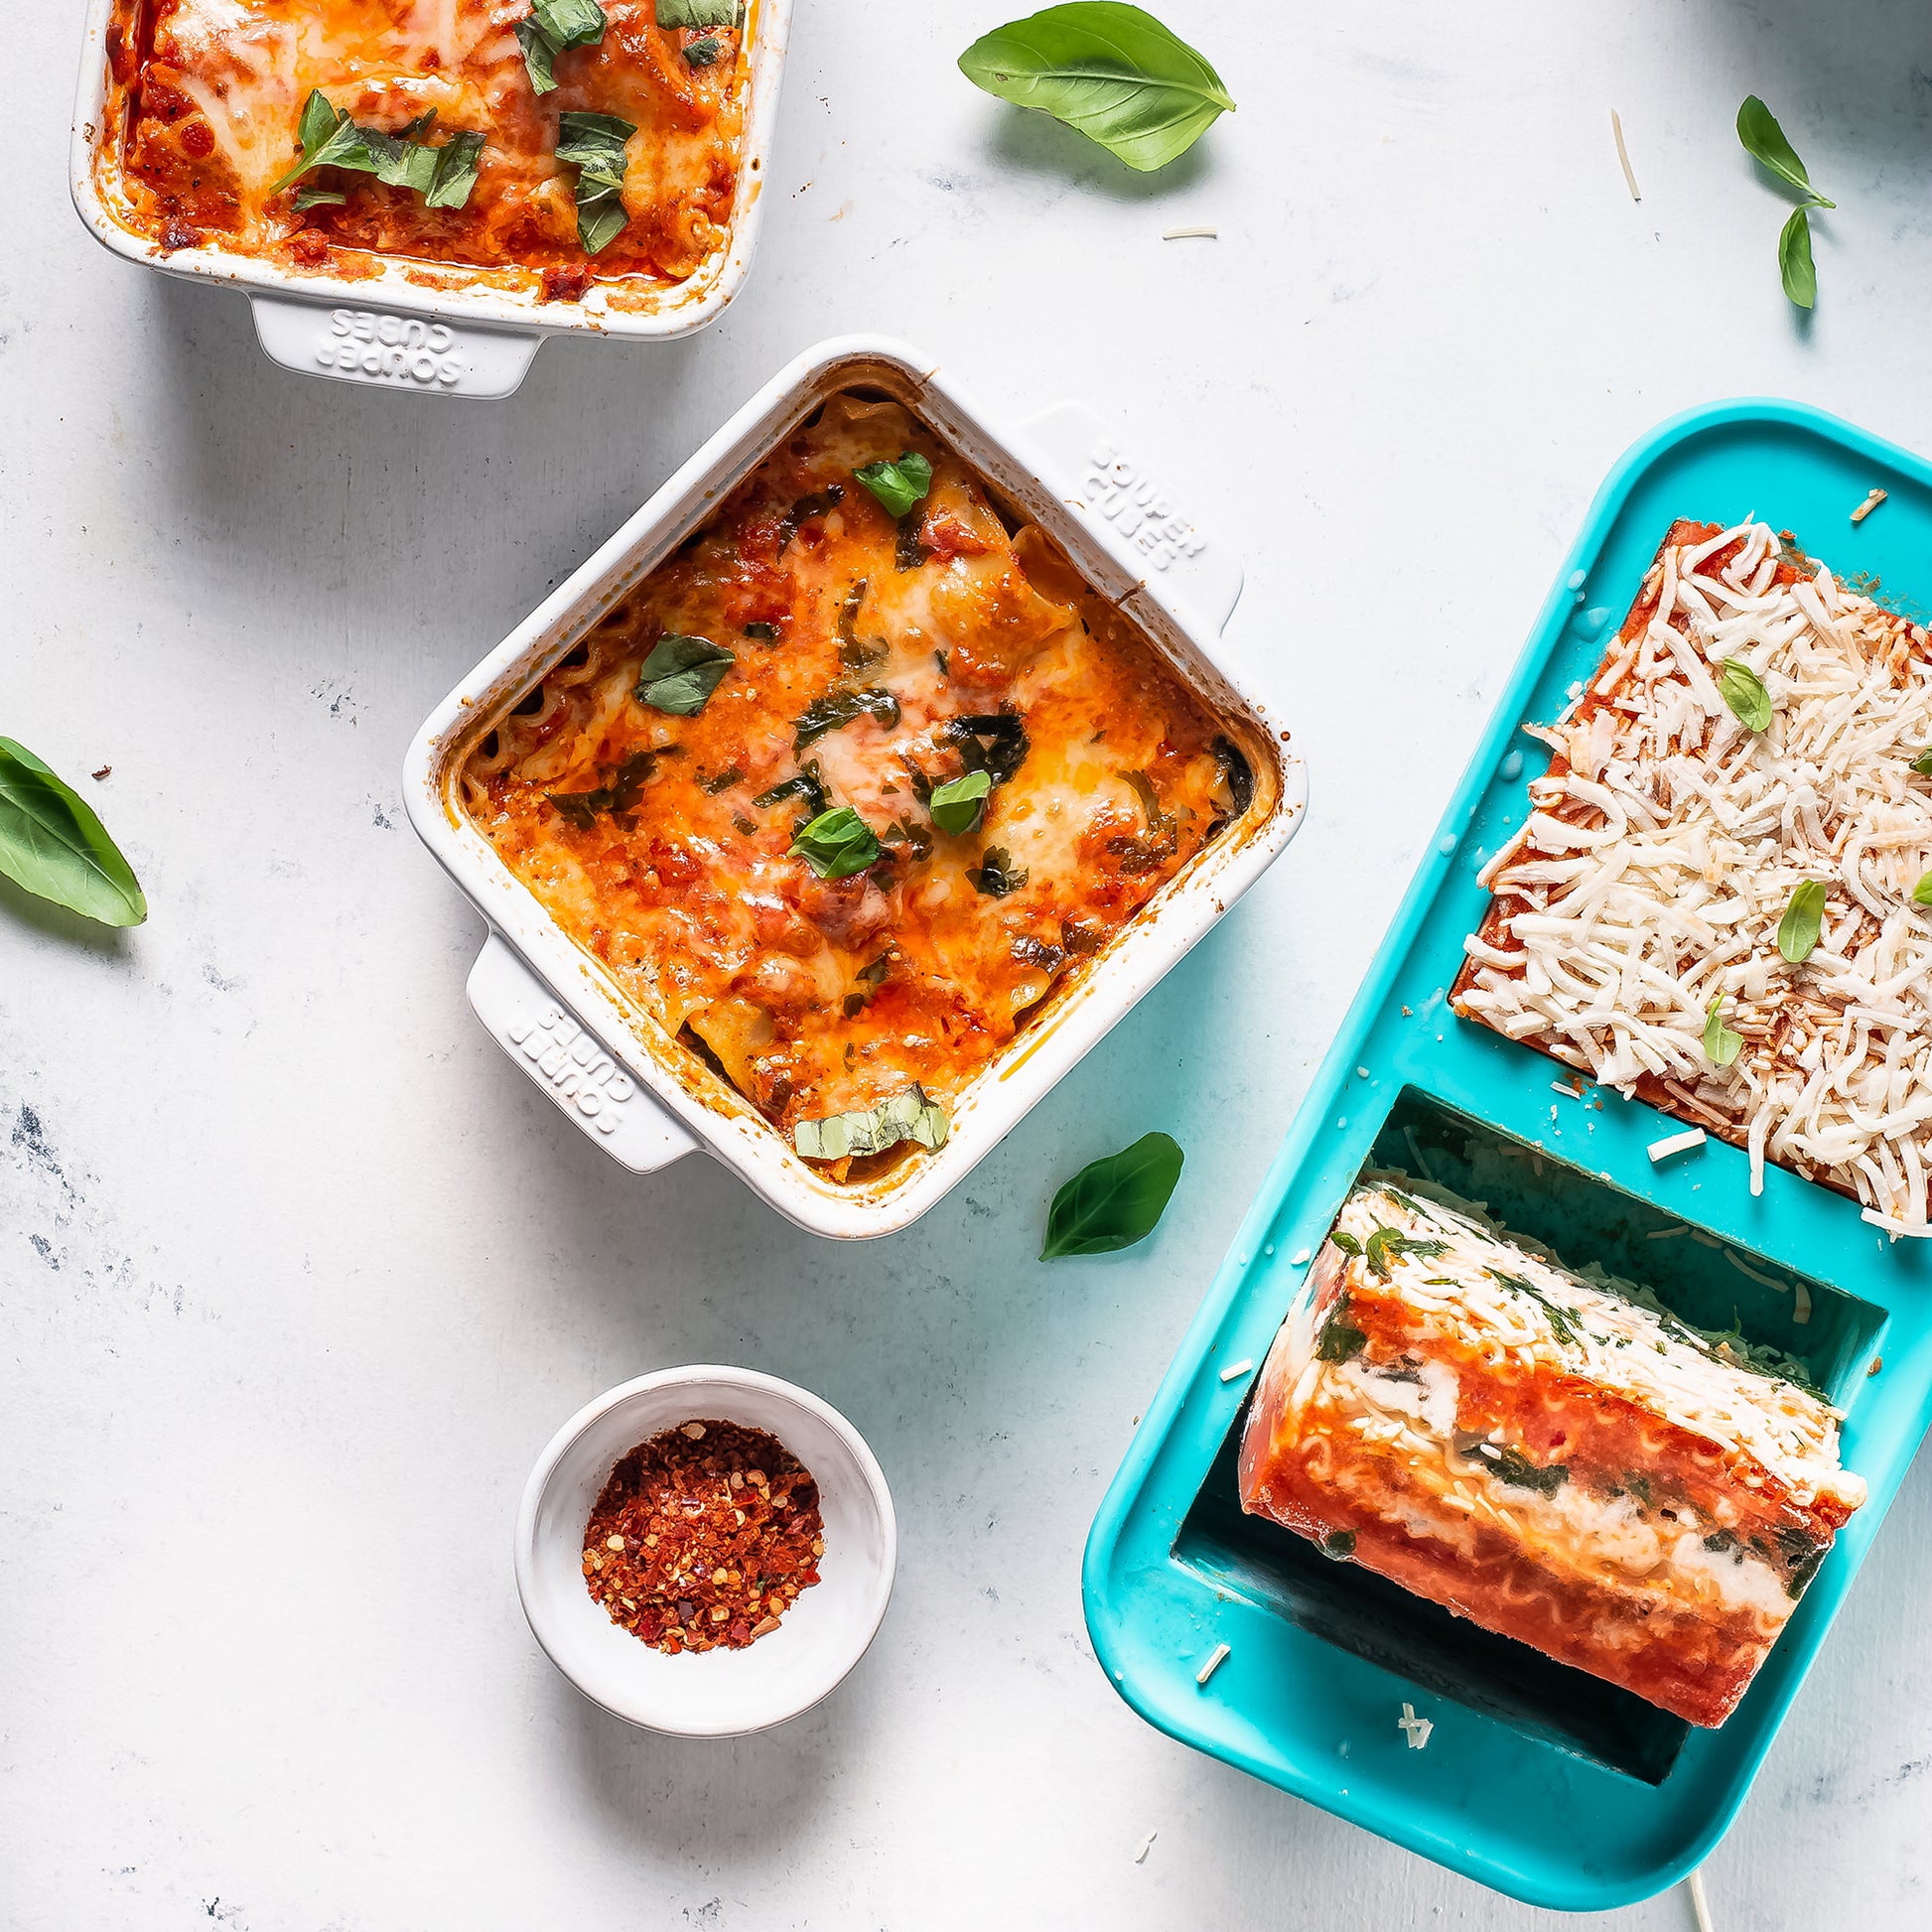 These Extra-Large Freezer Trays Make Family Dinner a Breeze